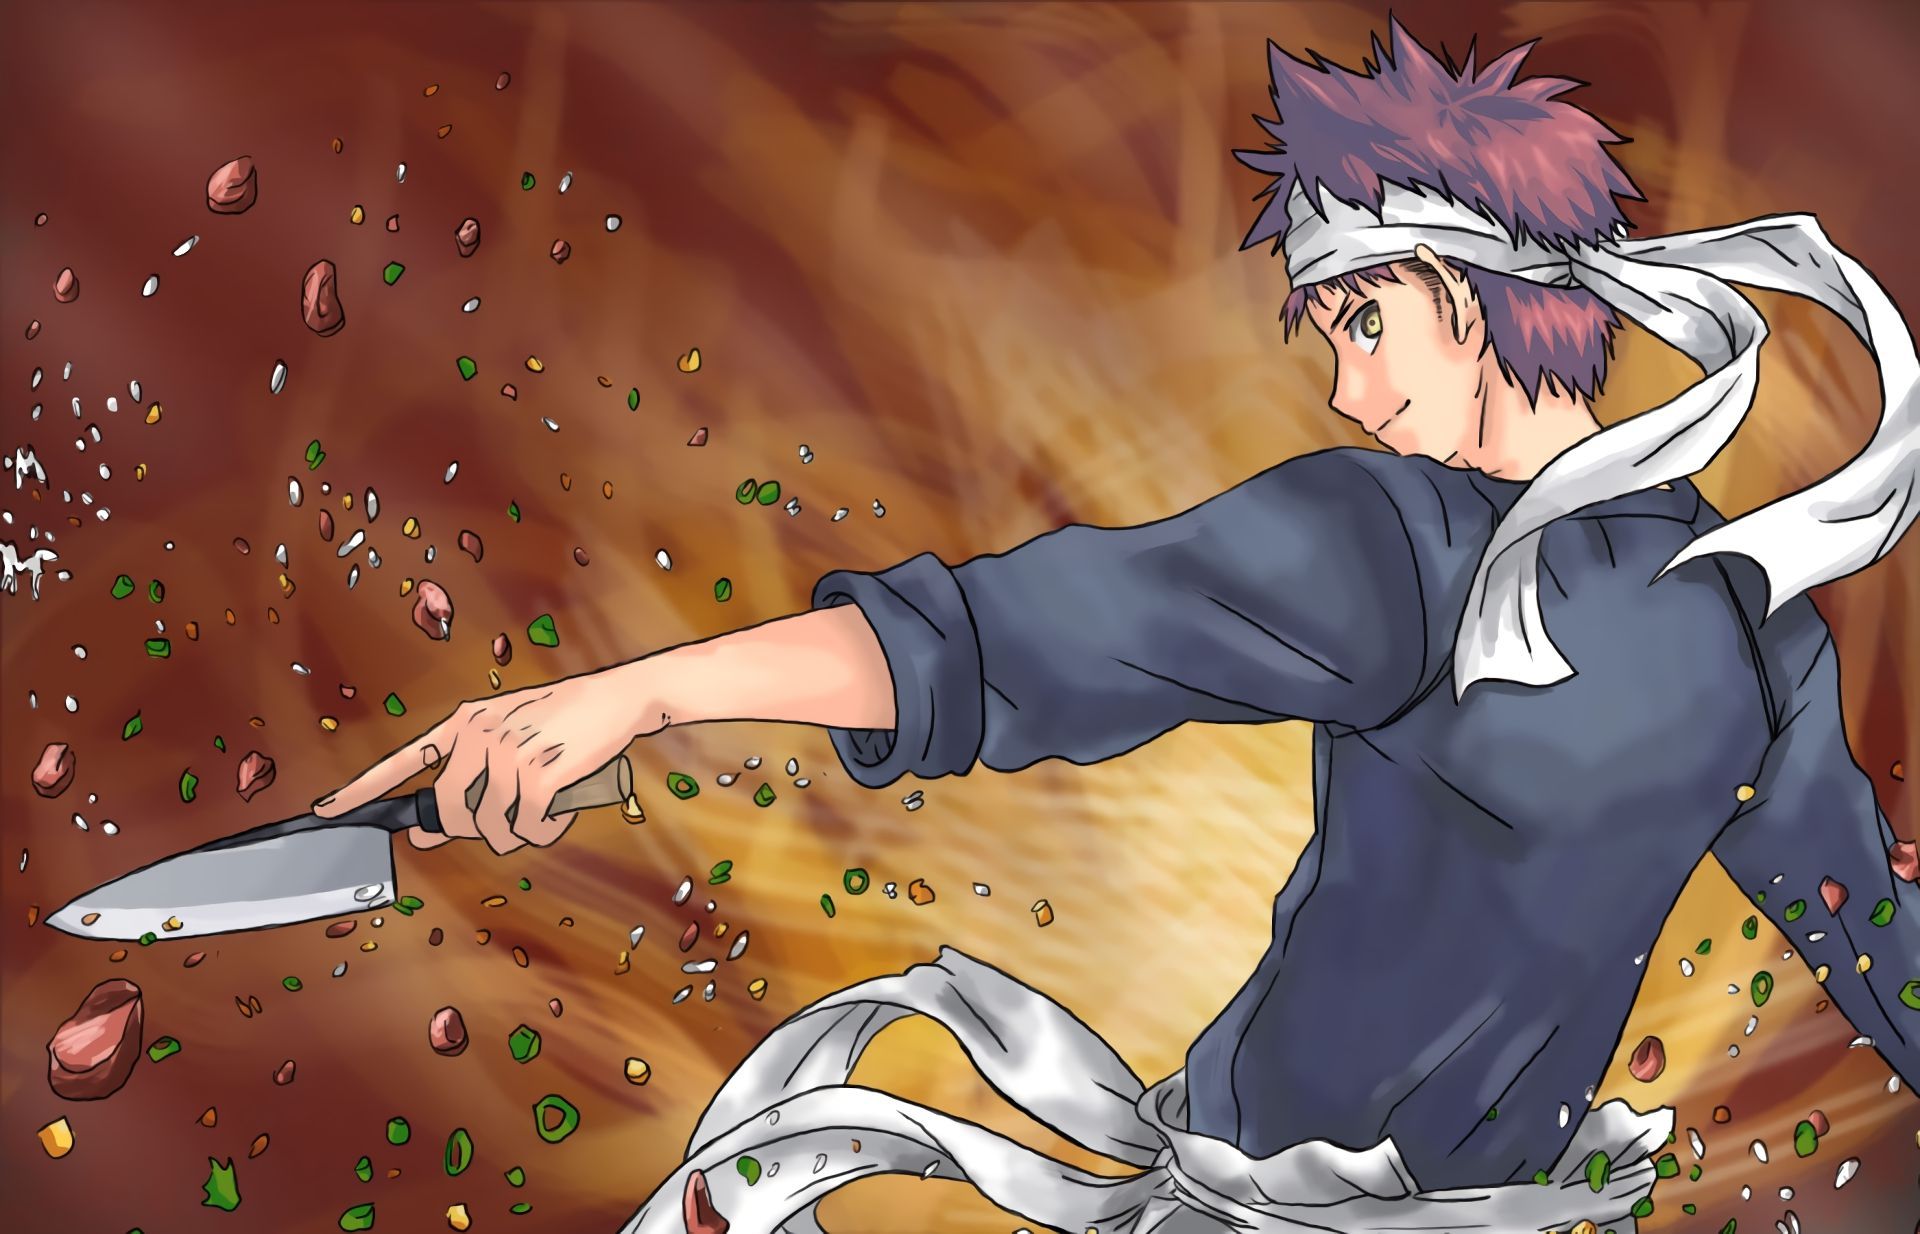 Anime Cooking Wallpaper Free Anime Cooking Background